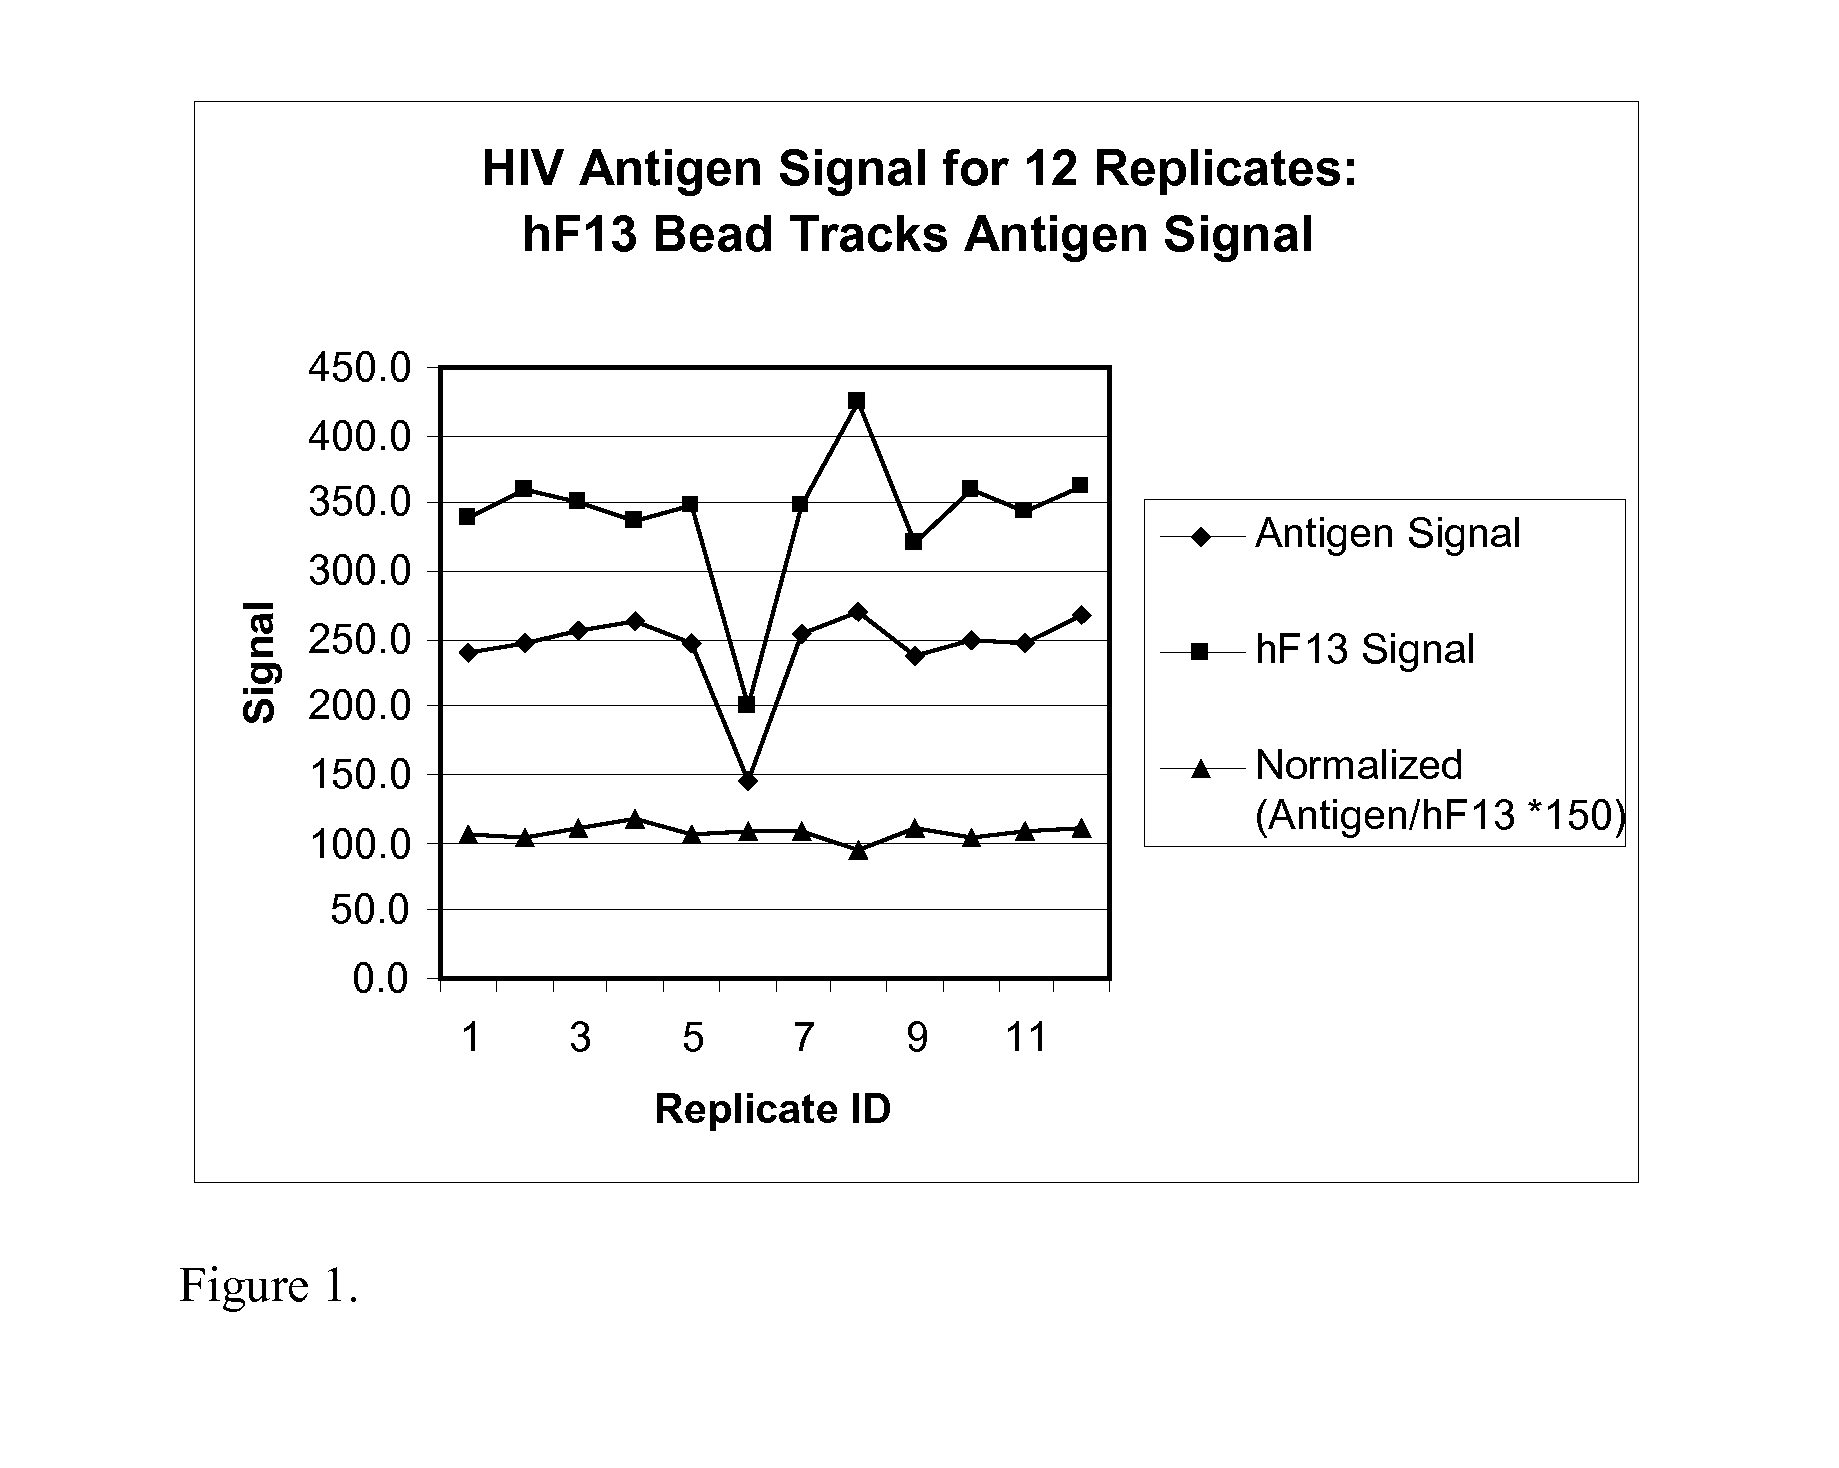 Human factor xiii as a normalization control for immunoassays